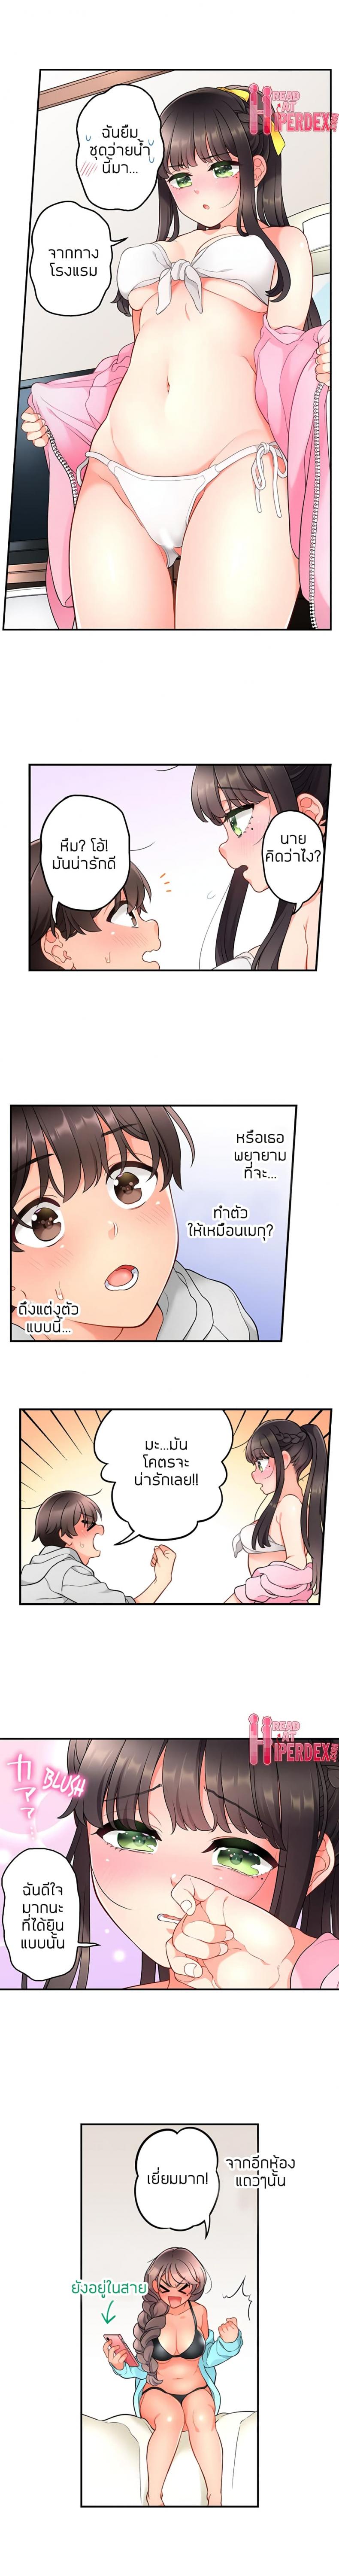 My Friend Came Back From the Future to Fuck Me 22 ภาพที่ 9